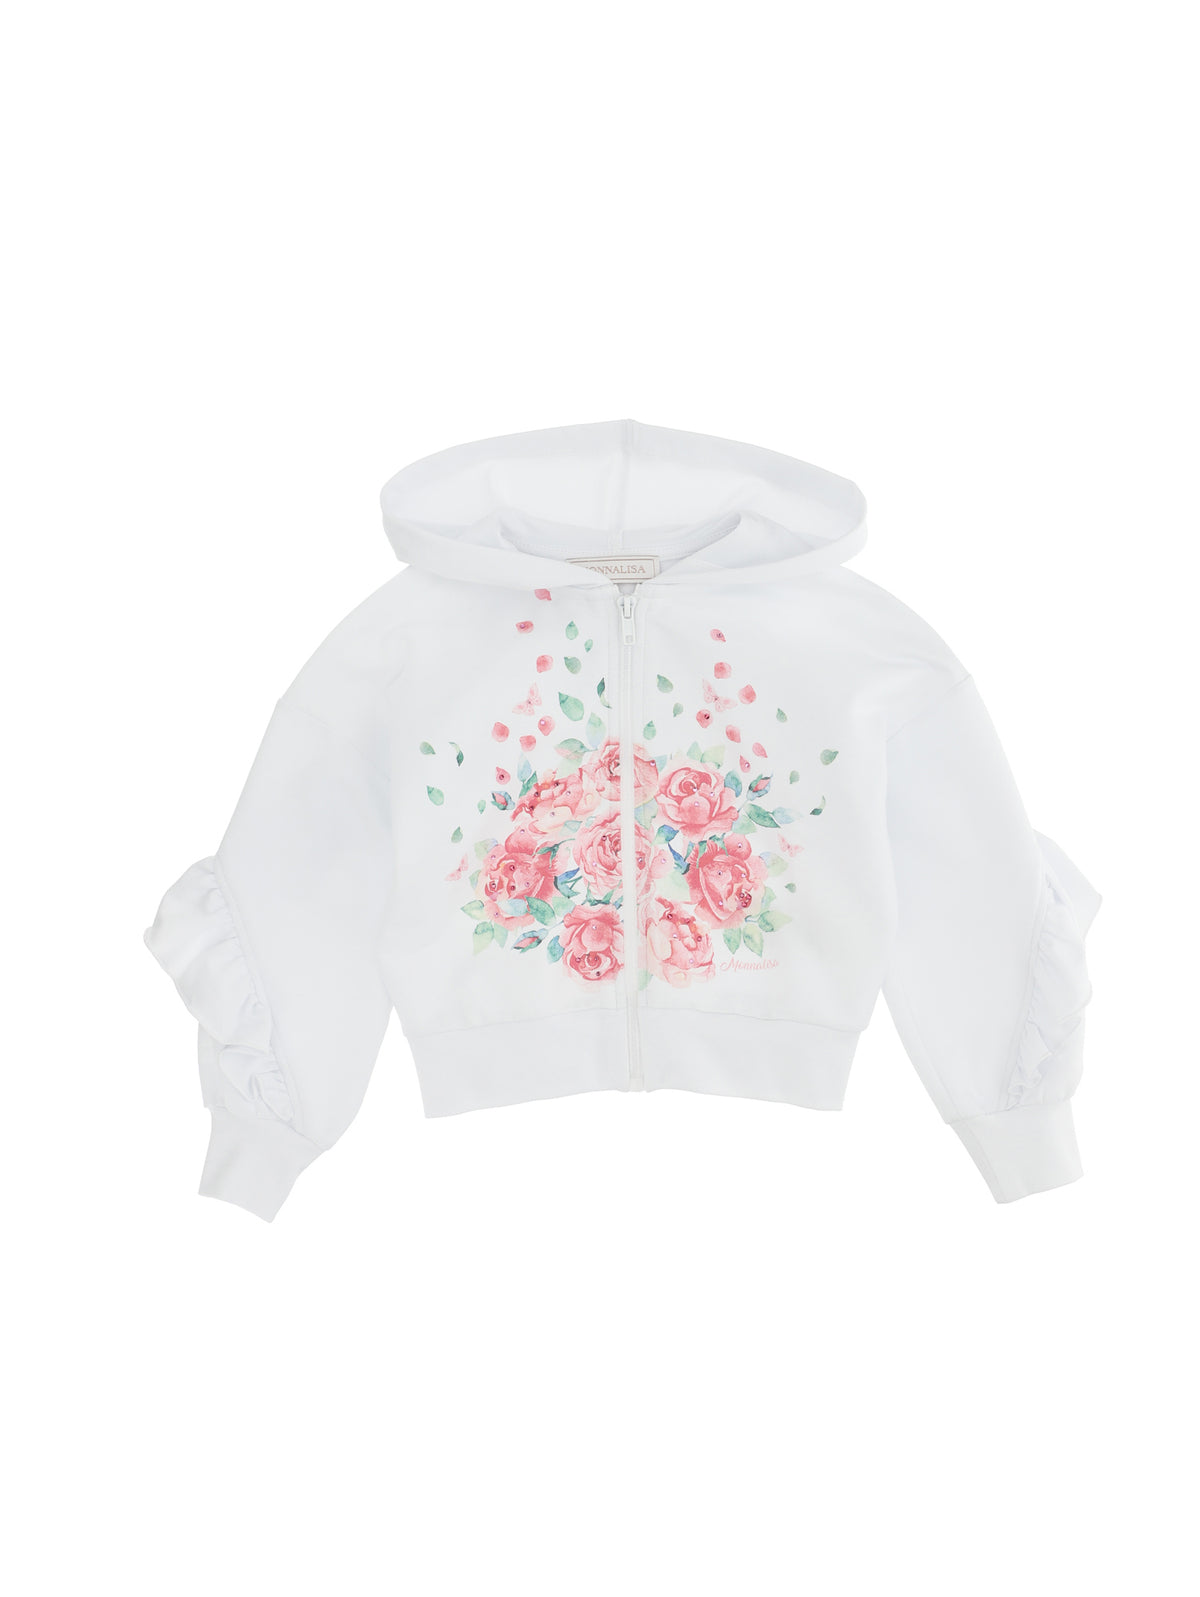 Cropped Hoody Jacket with Roses Print